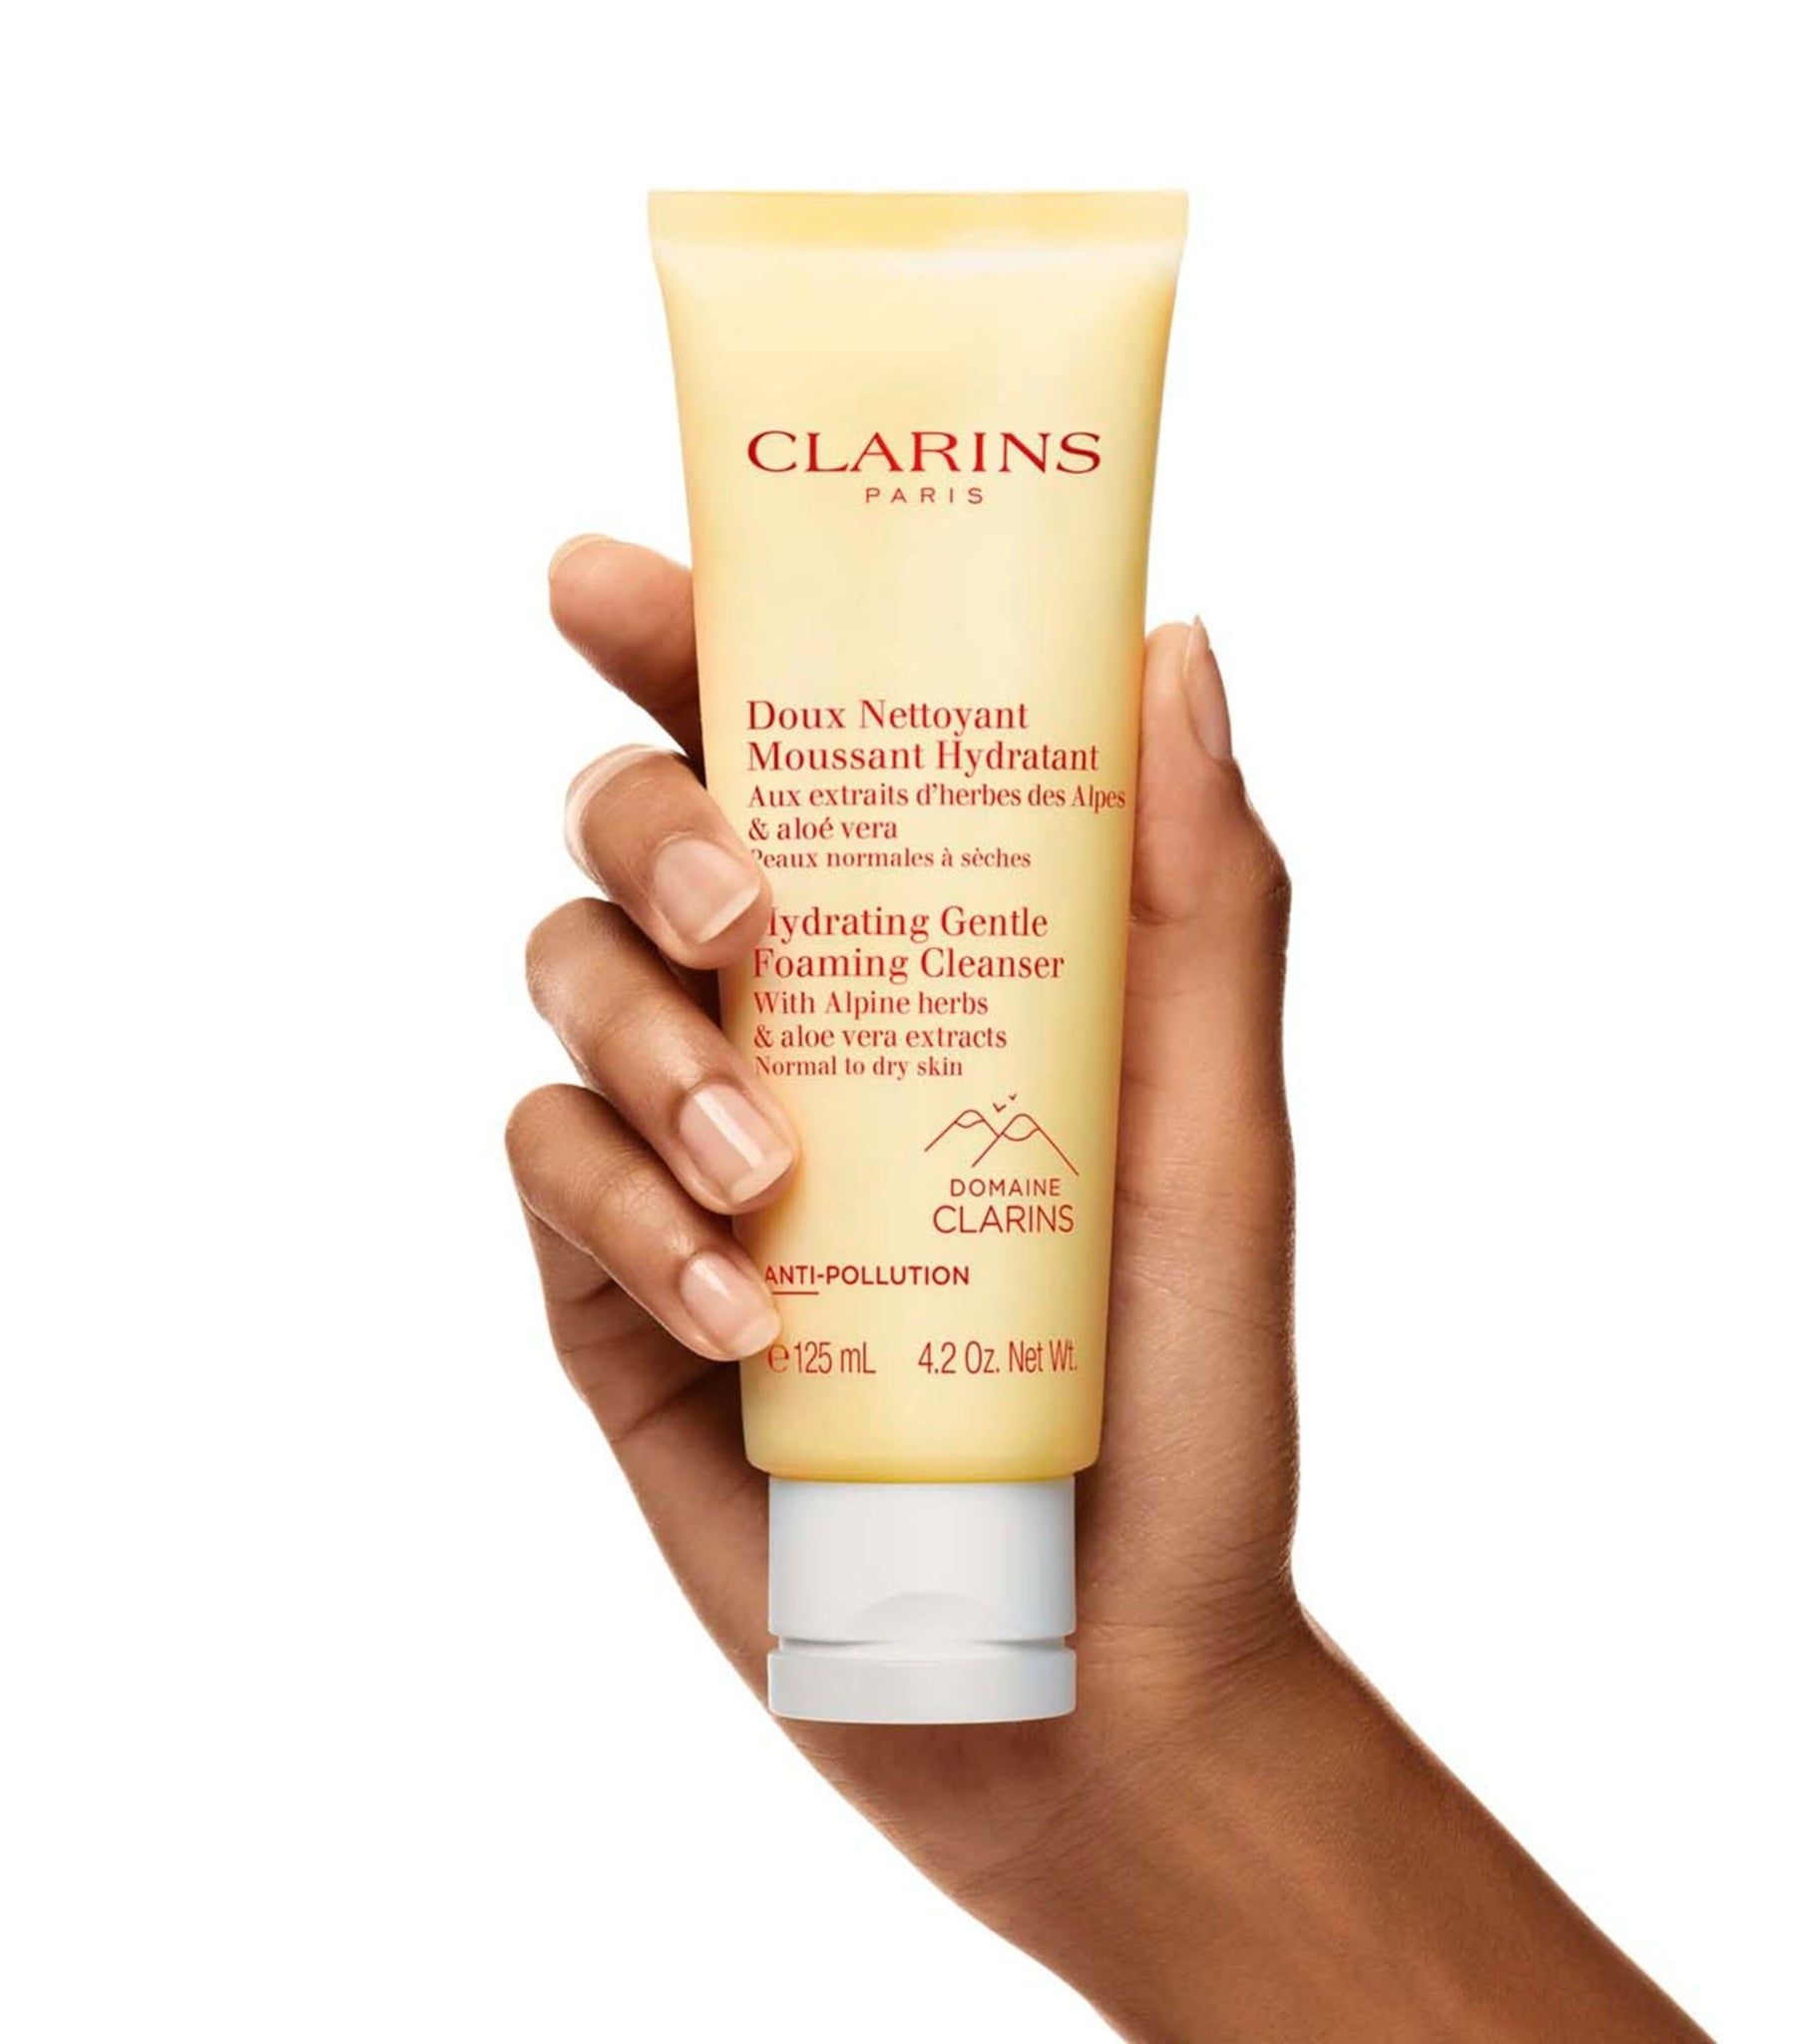 Clarins HYDRATING Gentle Foaming Cleanser 125ML